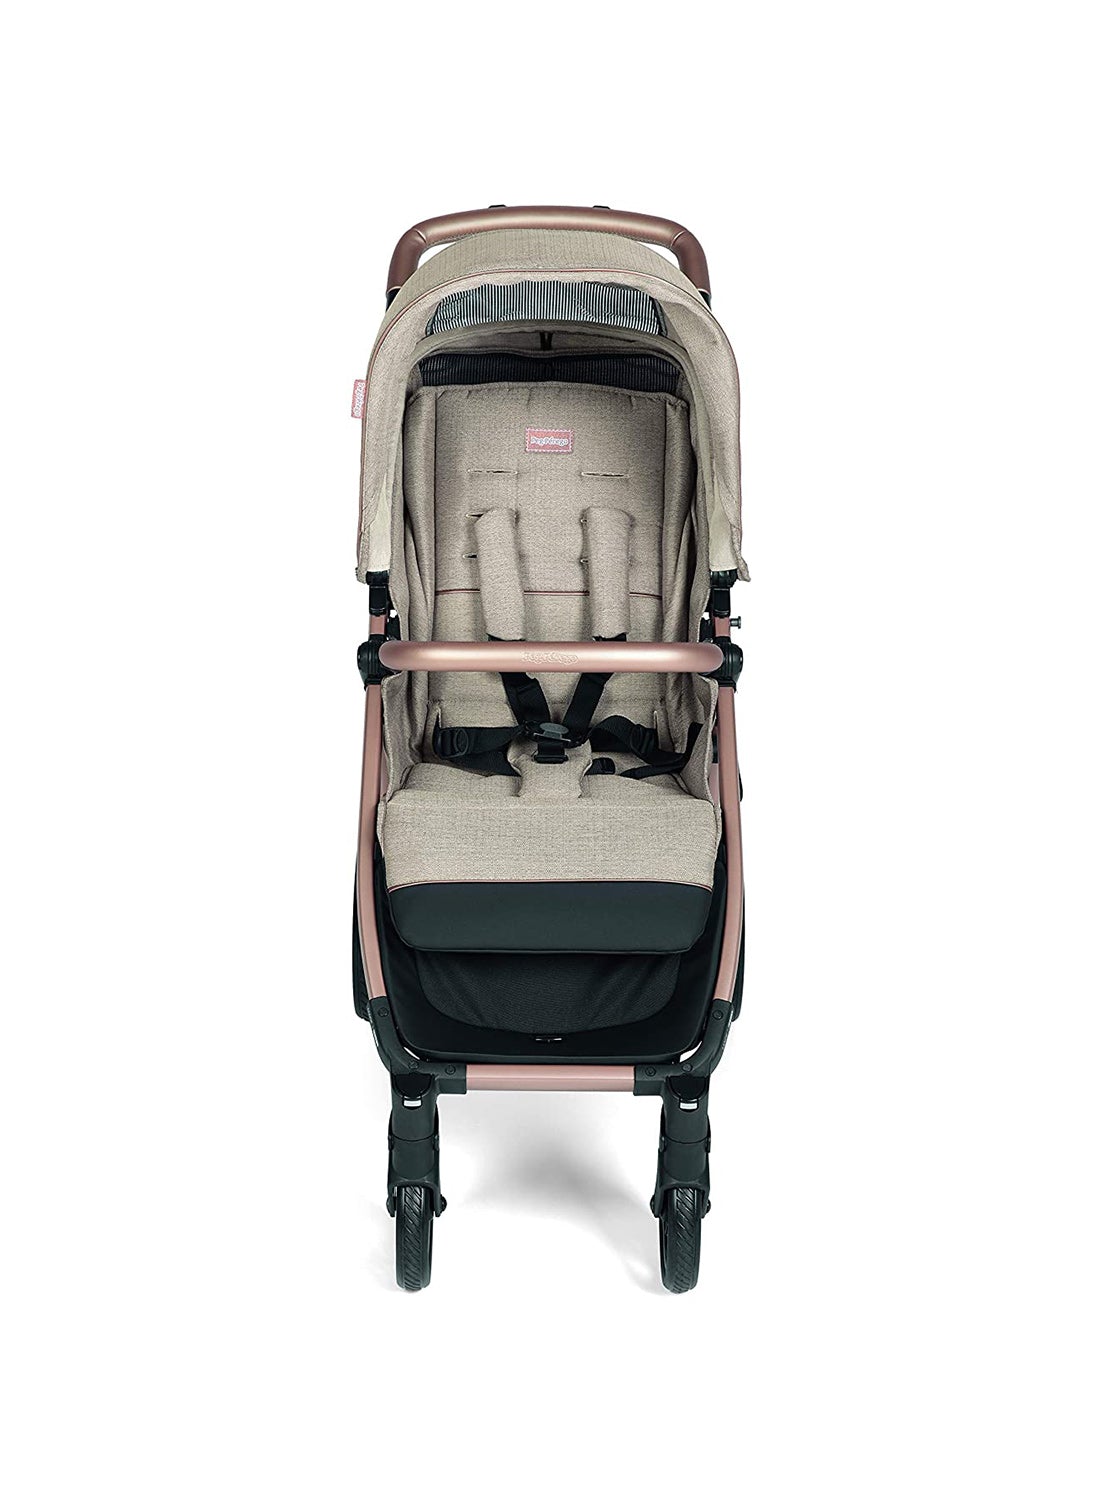 PEG PEREGO Booklet 50 Travel System - ANB Baby -$500 - $1000